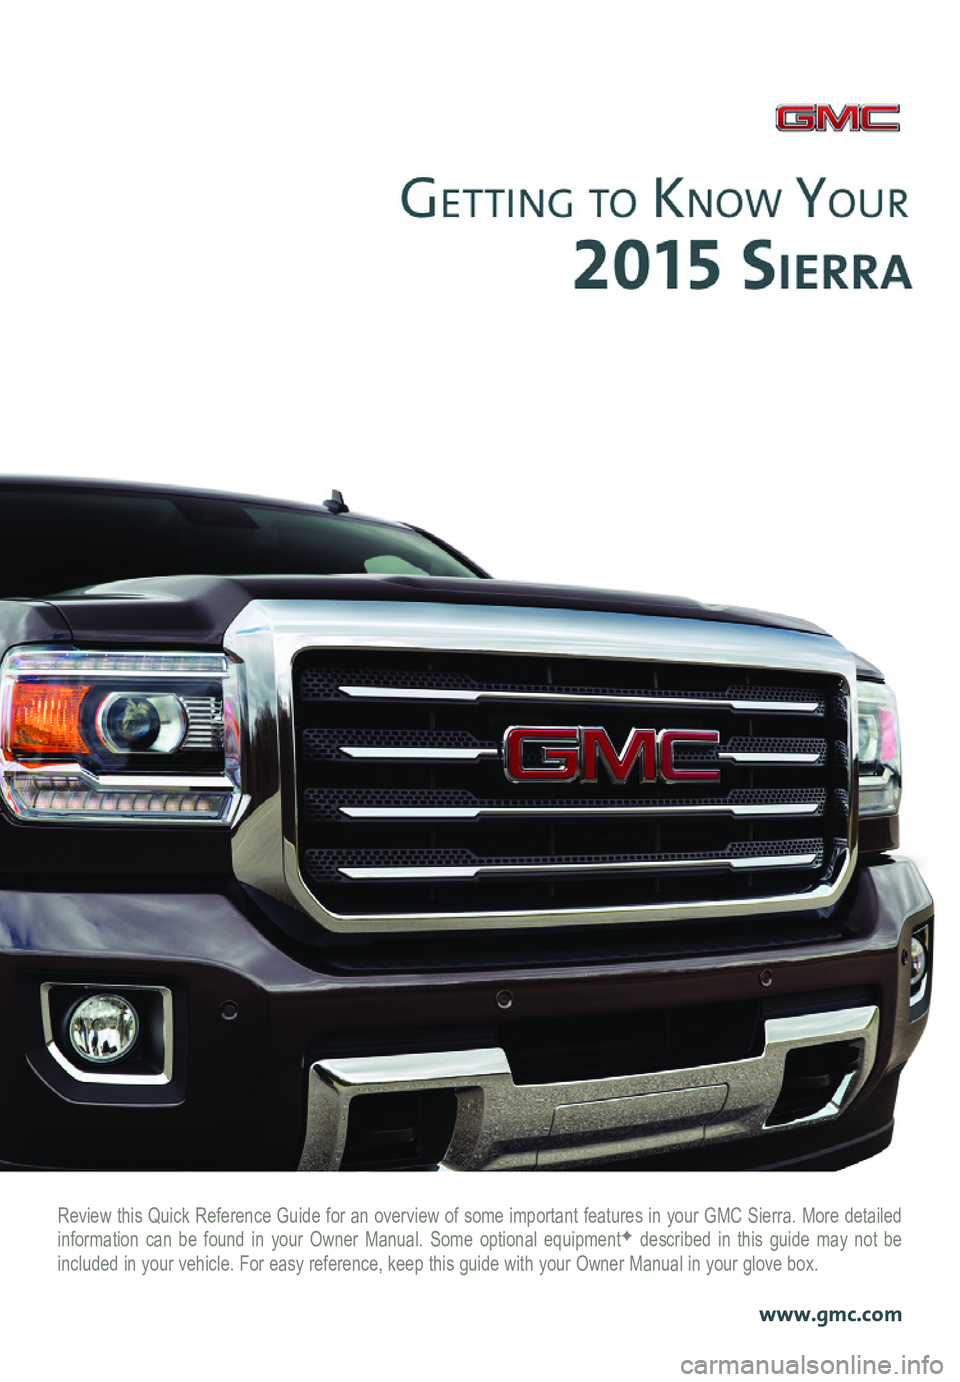 GMC SIERRA 2015  Get To Know Guide 